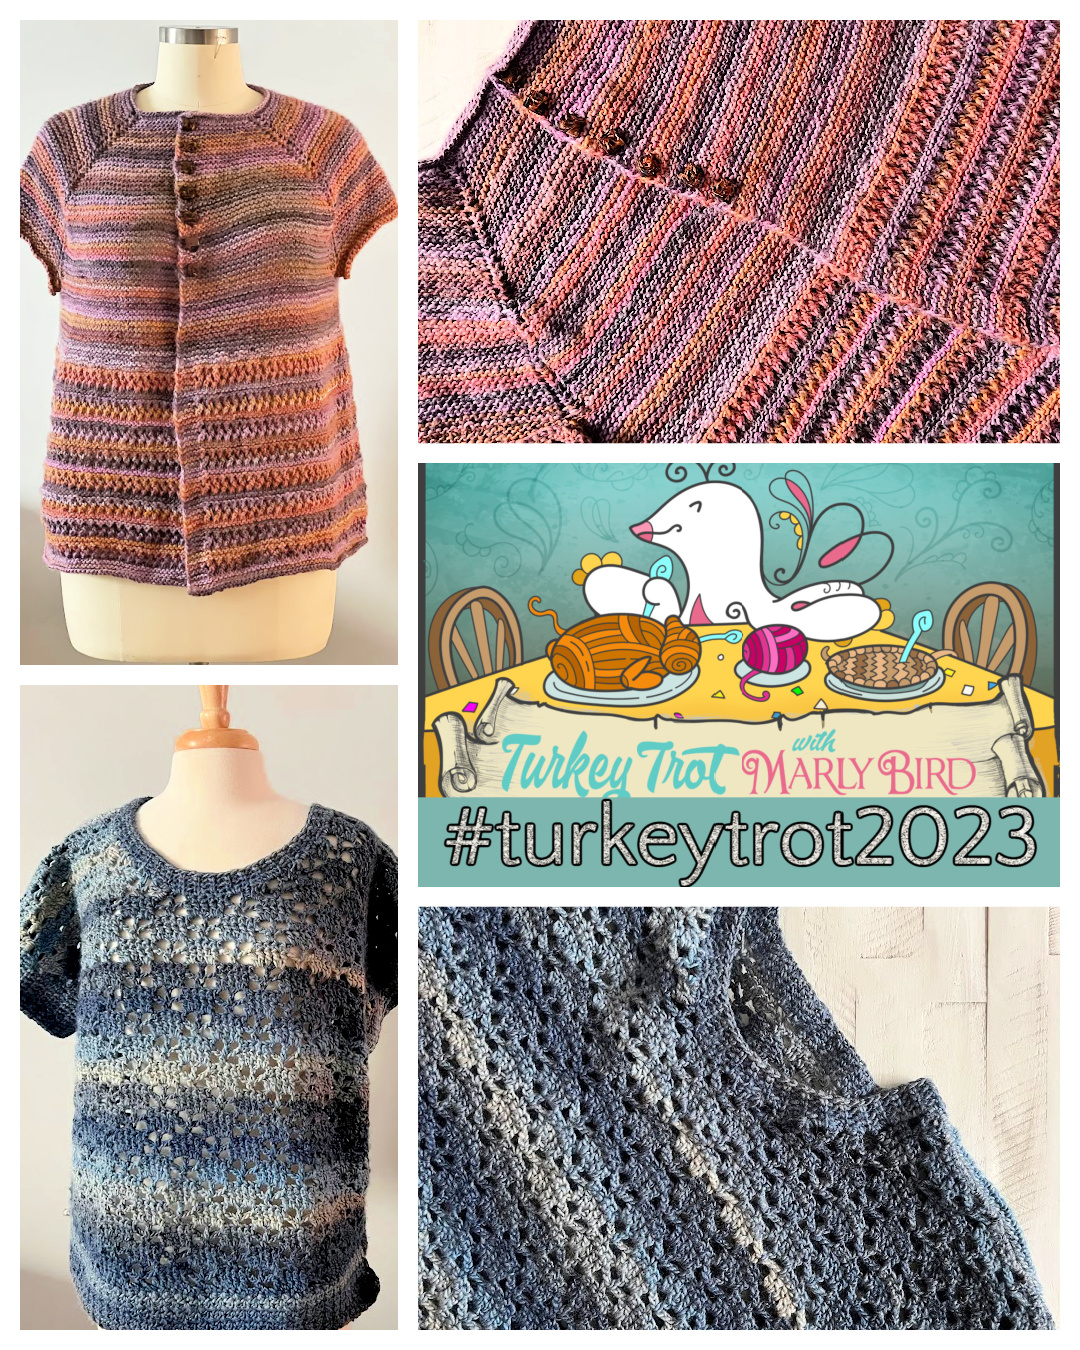 Collage for the Marly Bird Turkey Trot 2023 featuring the Trifle Crochet Sweater and Shoop Shoop Shoop Knit Cardigan. Top left: A mannequin displaying a buttoned knit cardigan in variegated shades of pink, purple, and orange. Top right: Close-up of the cardigan's textured stitch detail. Center: Promotional illustration with a playful polar bear and yarn on a dining table, with the text 'Turkey Trot with Marly Bird #turkeytrot2023.' Bottom left: A mannequin showcasing a blue ombre crochet sweater with short sleeves. Bottom right: Close-up of the crochet sweater's intricate stitch pattern.